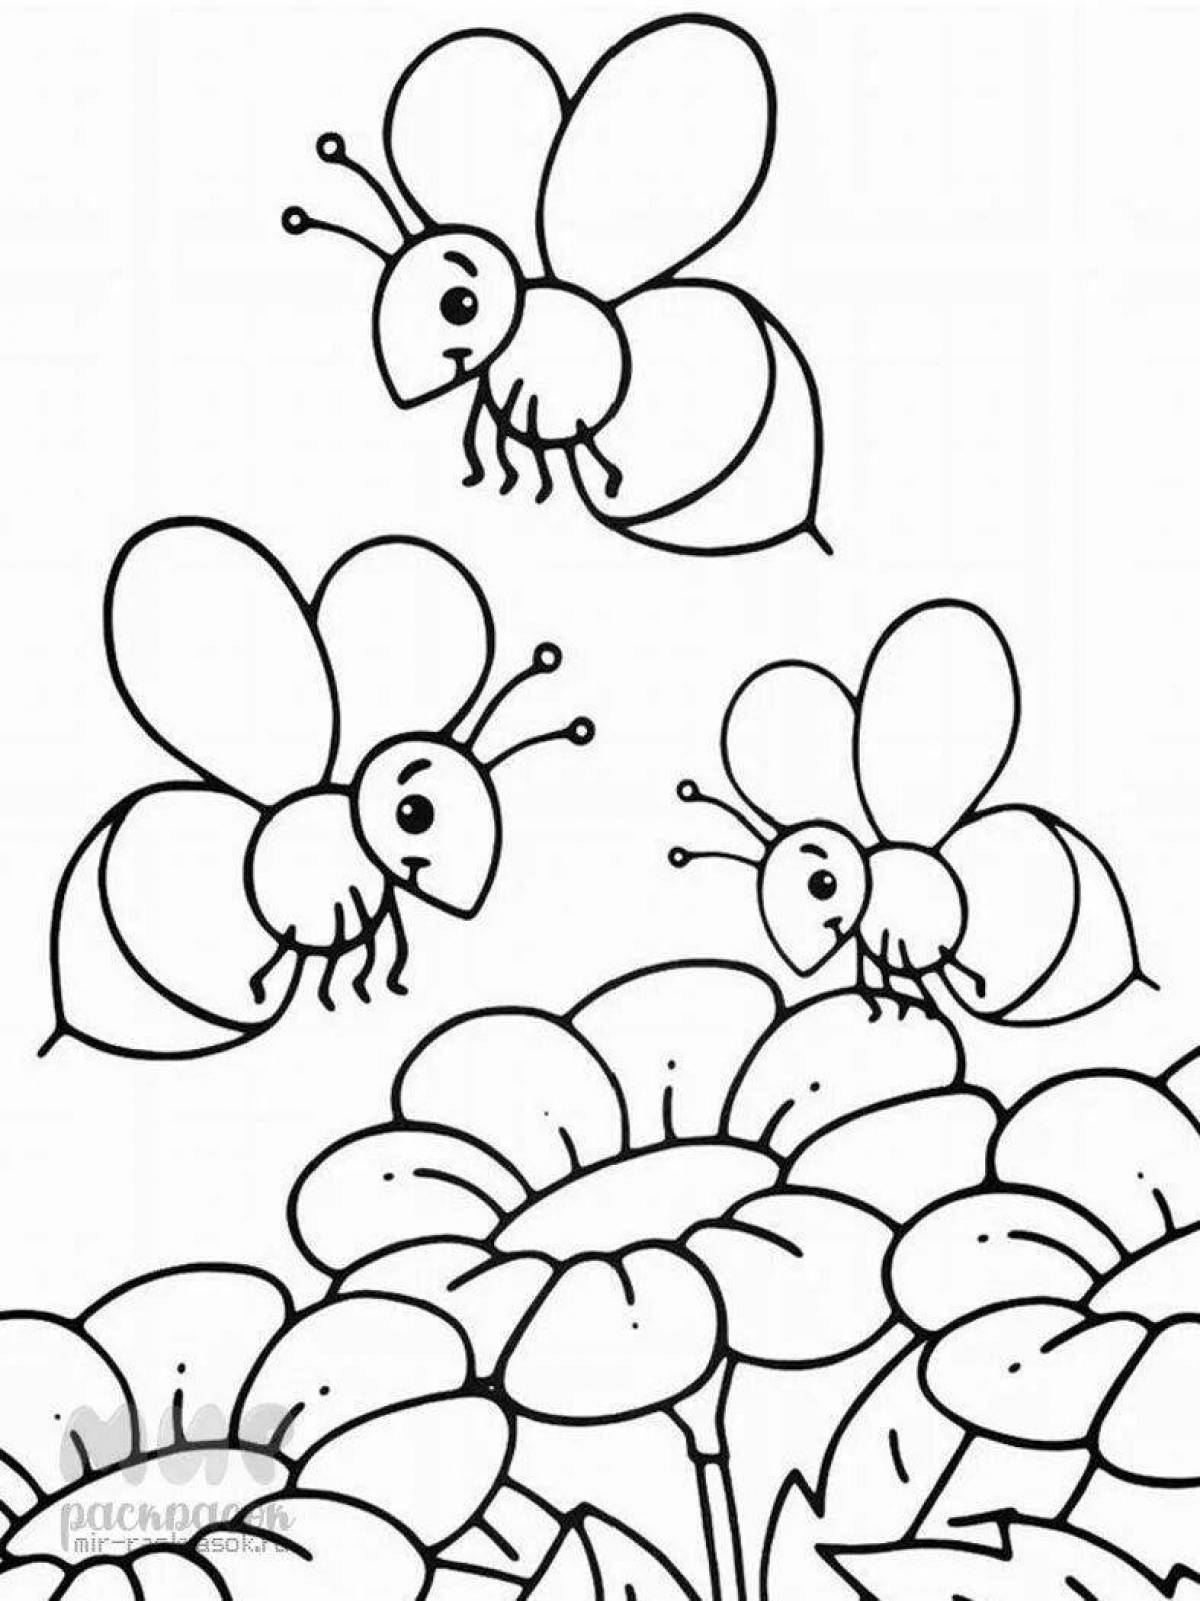 Insects for children 5 6 years old #7